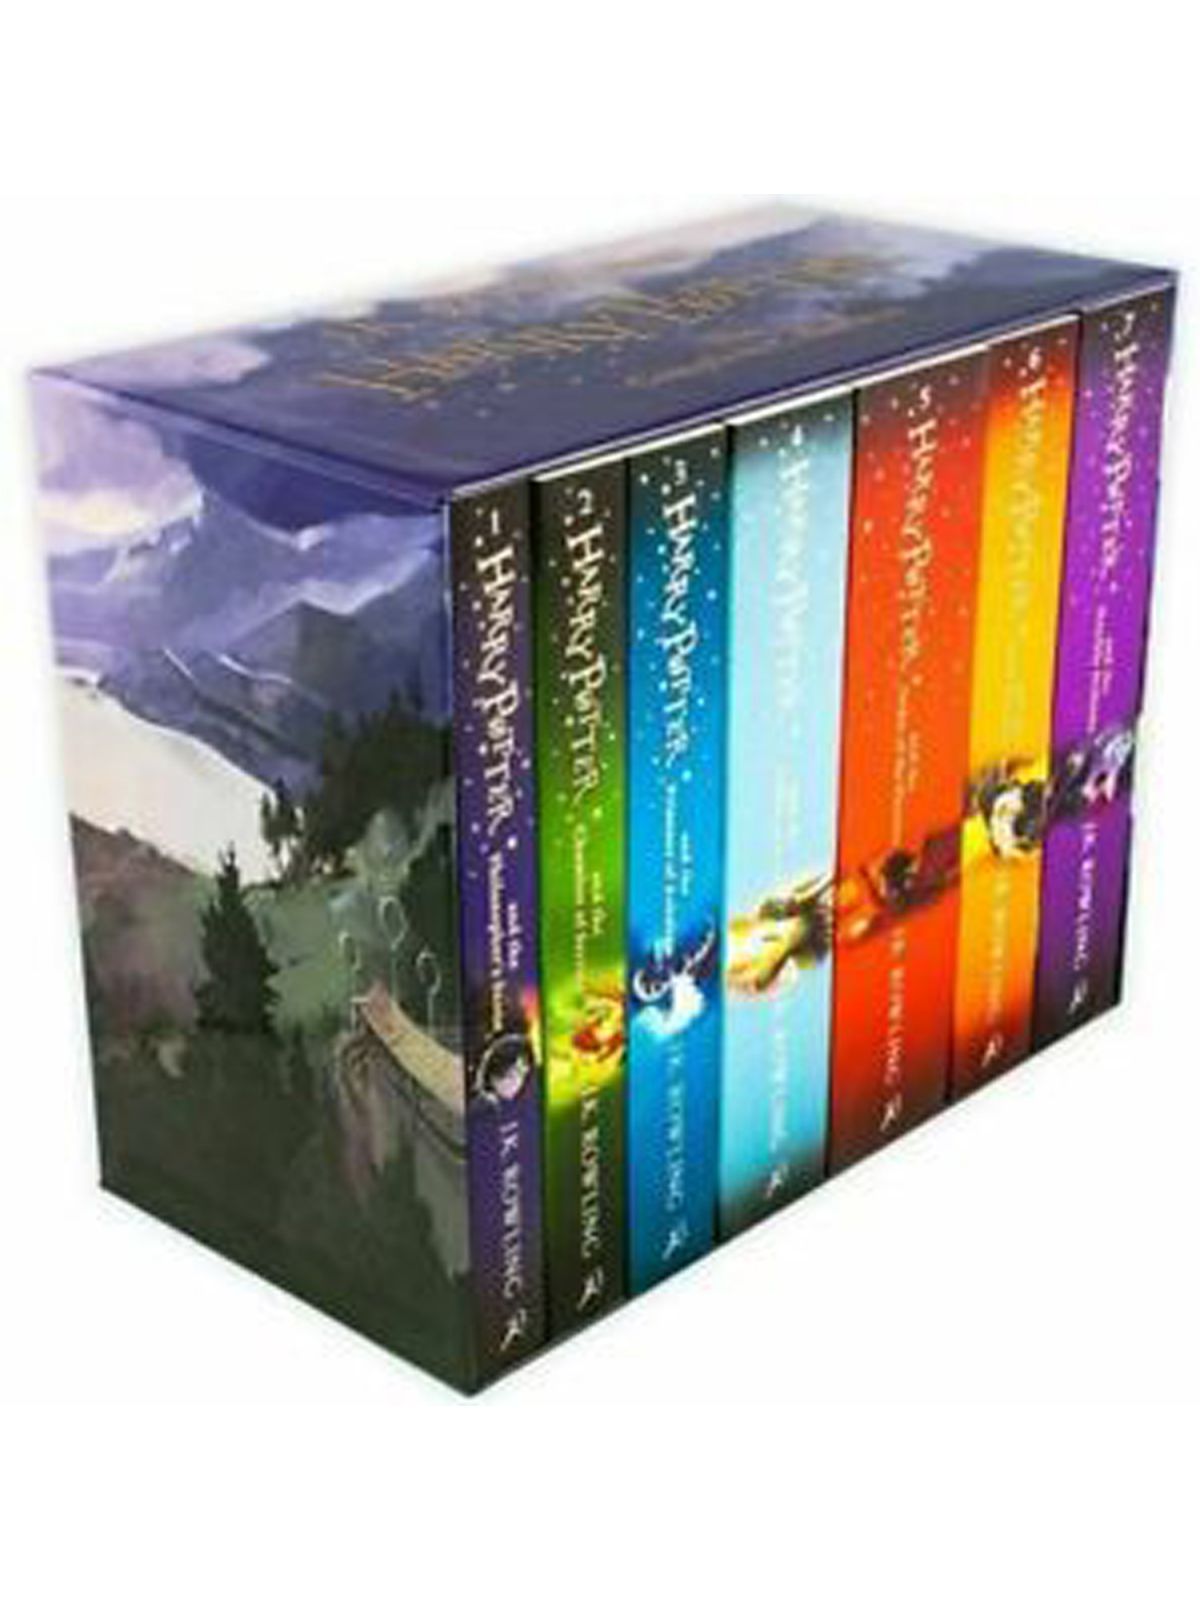 HARRY POTTER BOXED SET COMPLETE COLLECTION